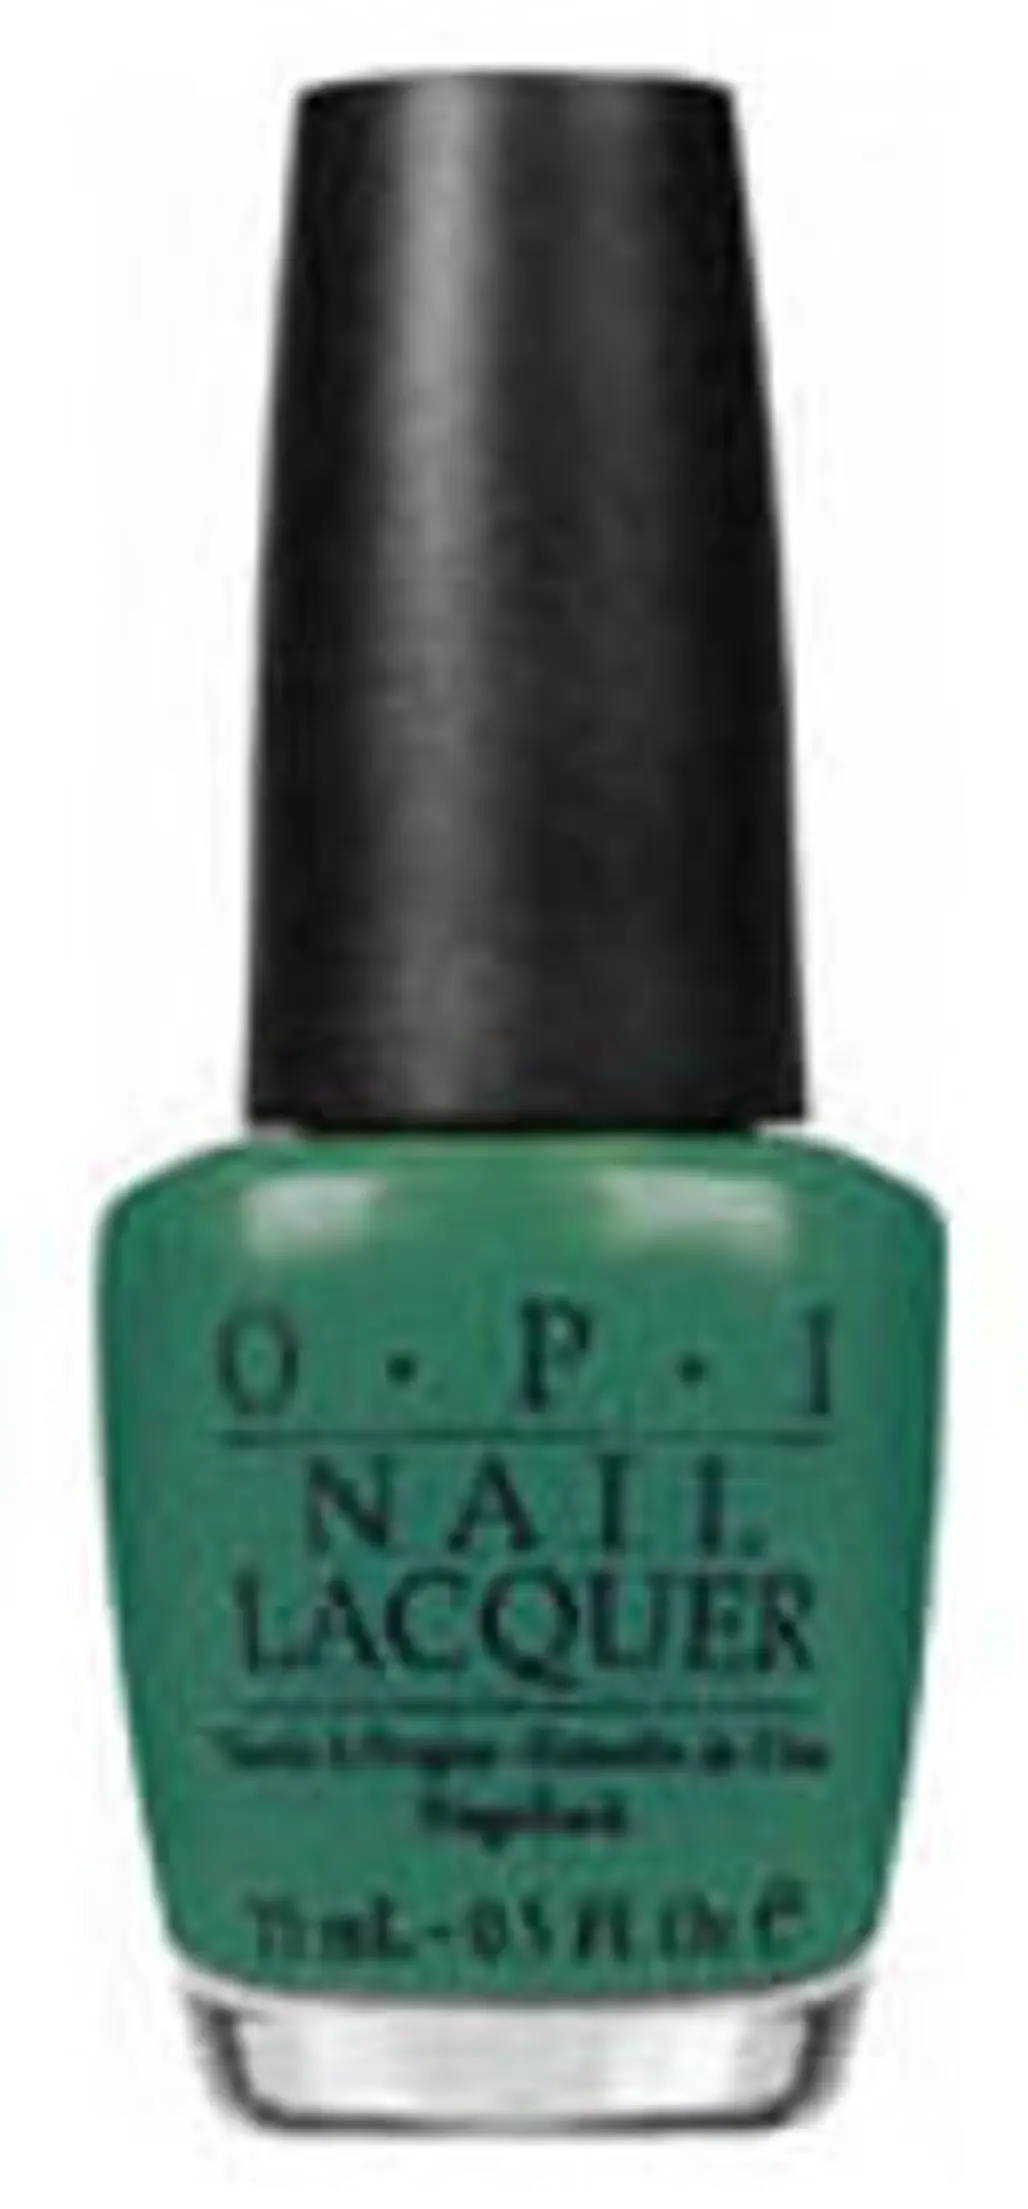 OPI Nail Lacquer in Jade is the New Black